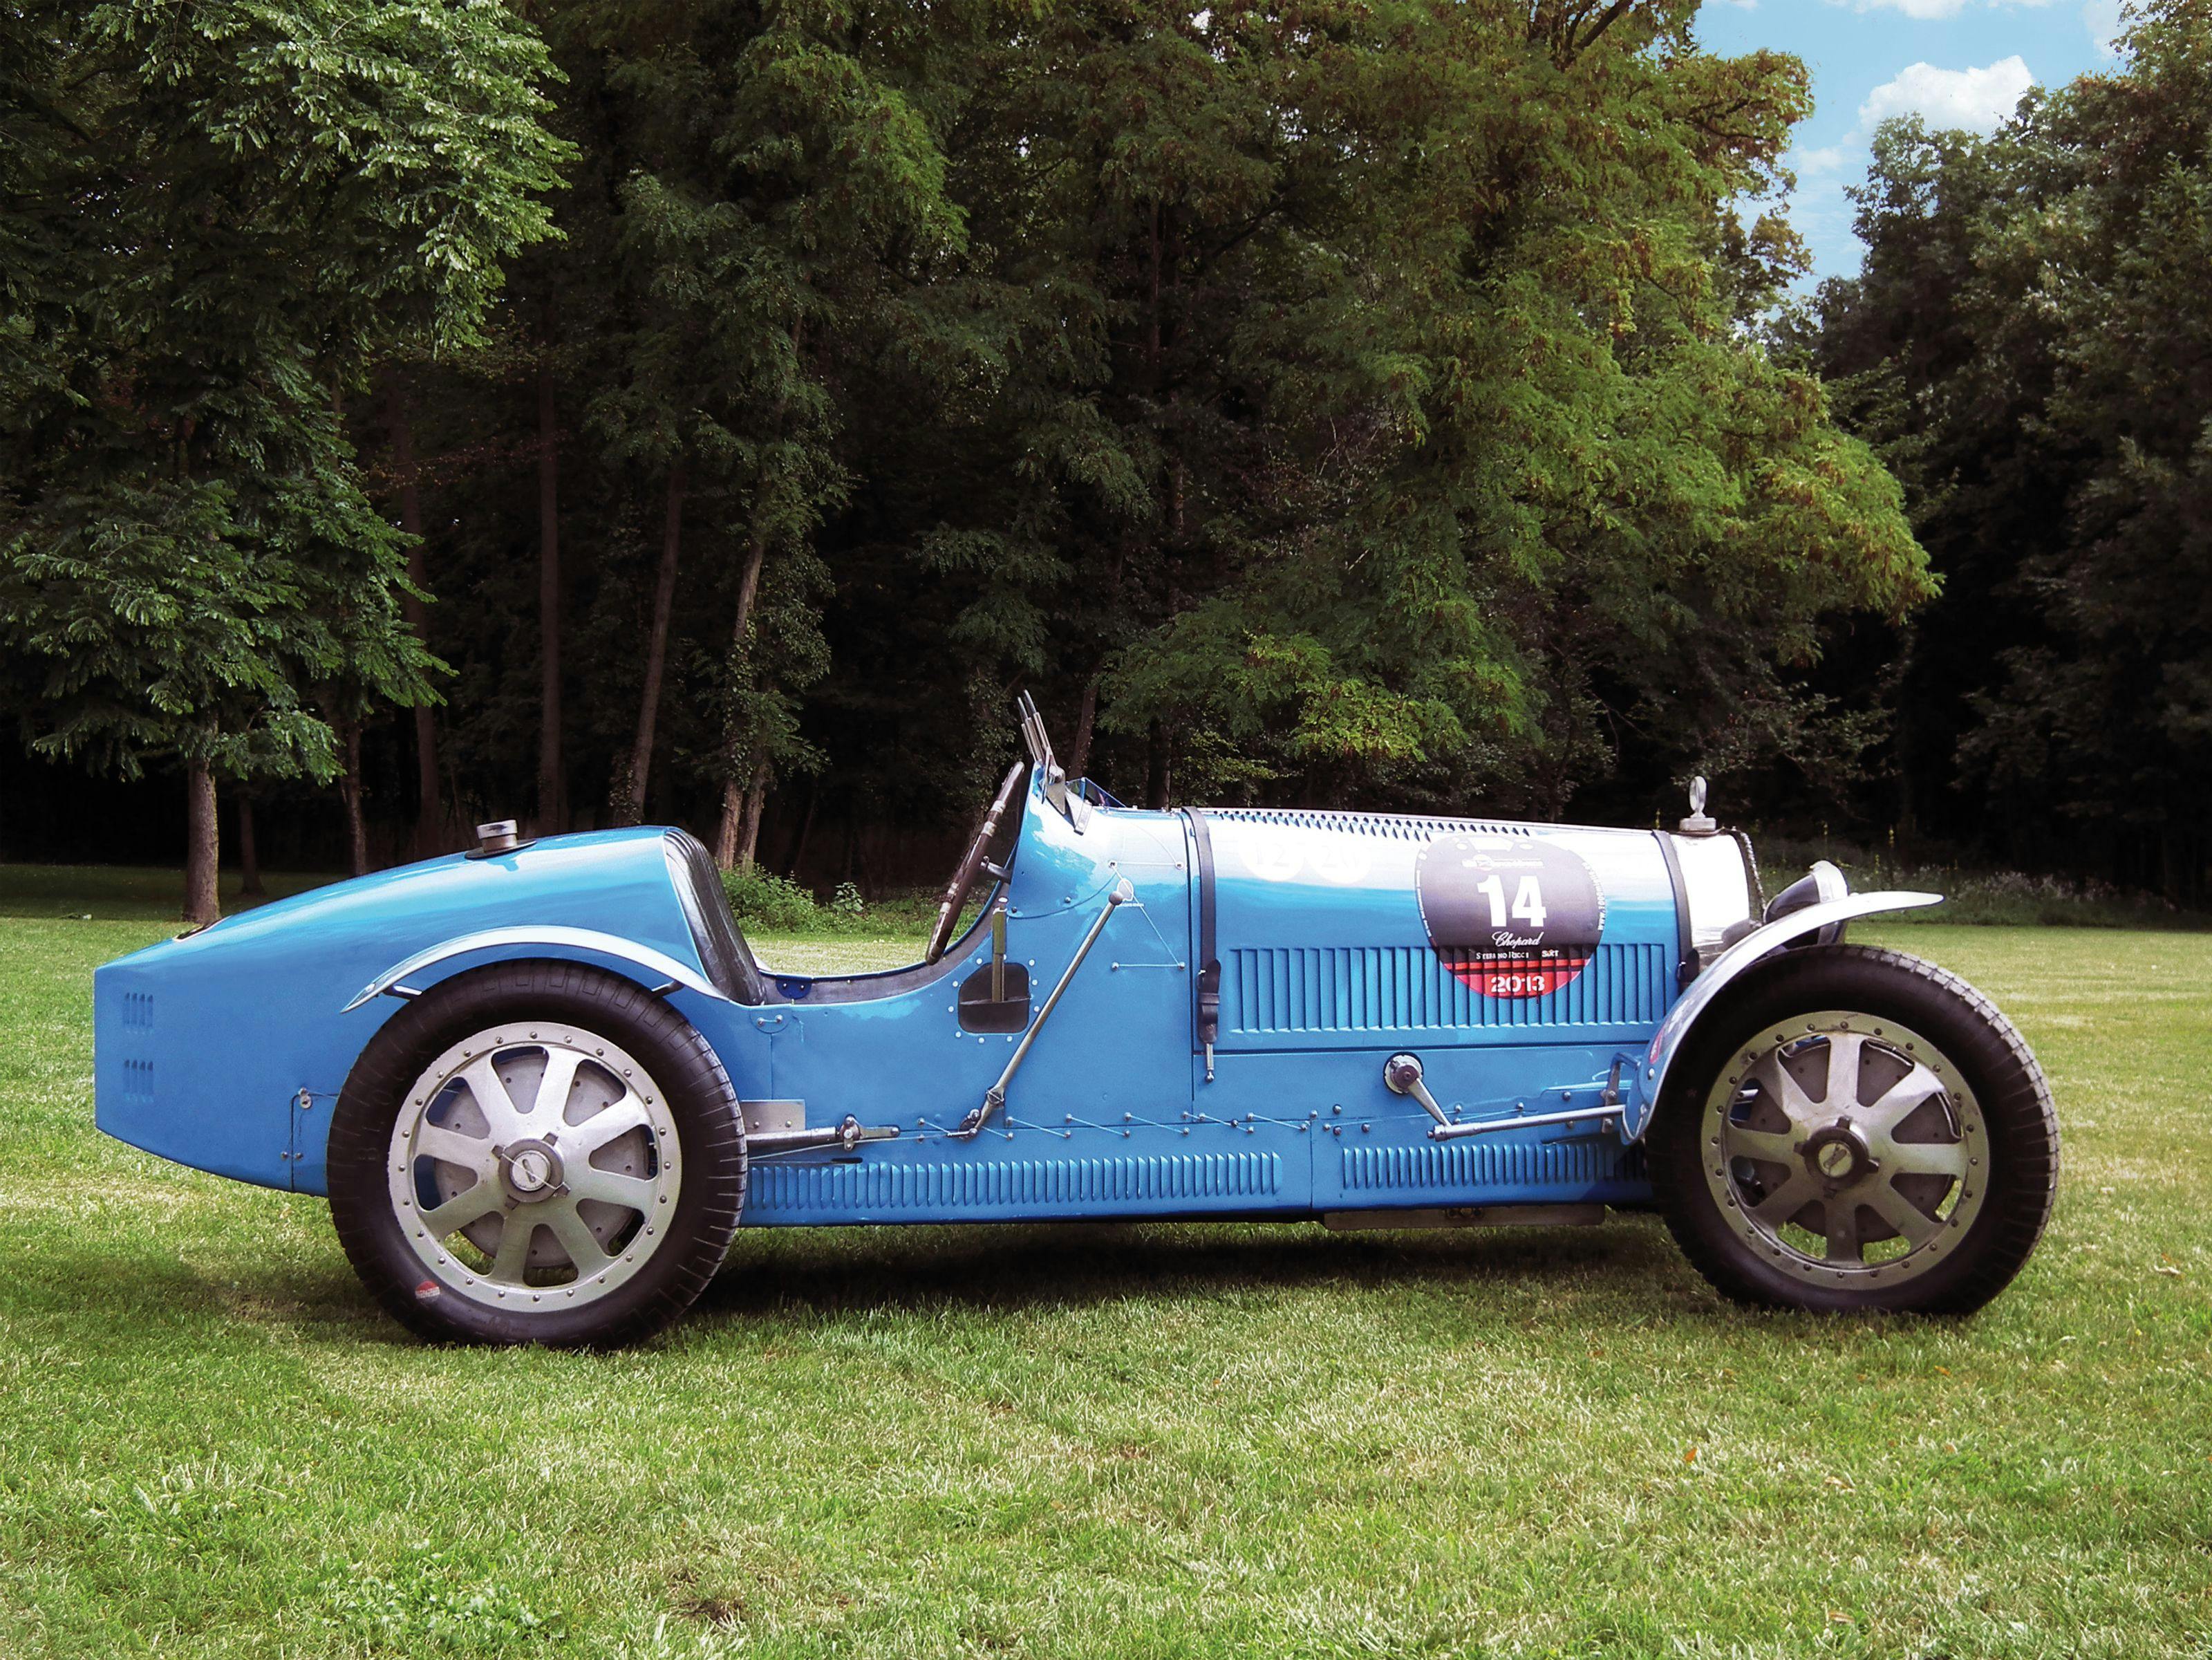 Mille Miglia 2013: Bugatti to compete with one of the most successful racing cars of all time, the Type 35